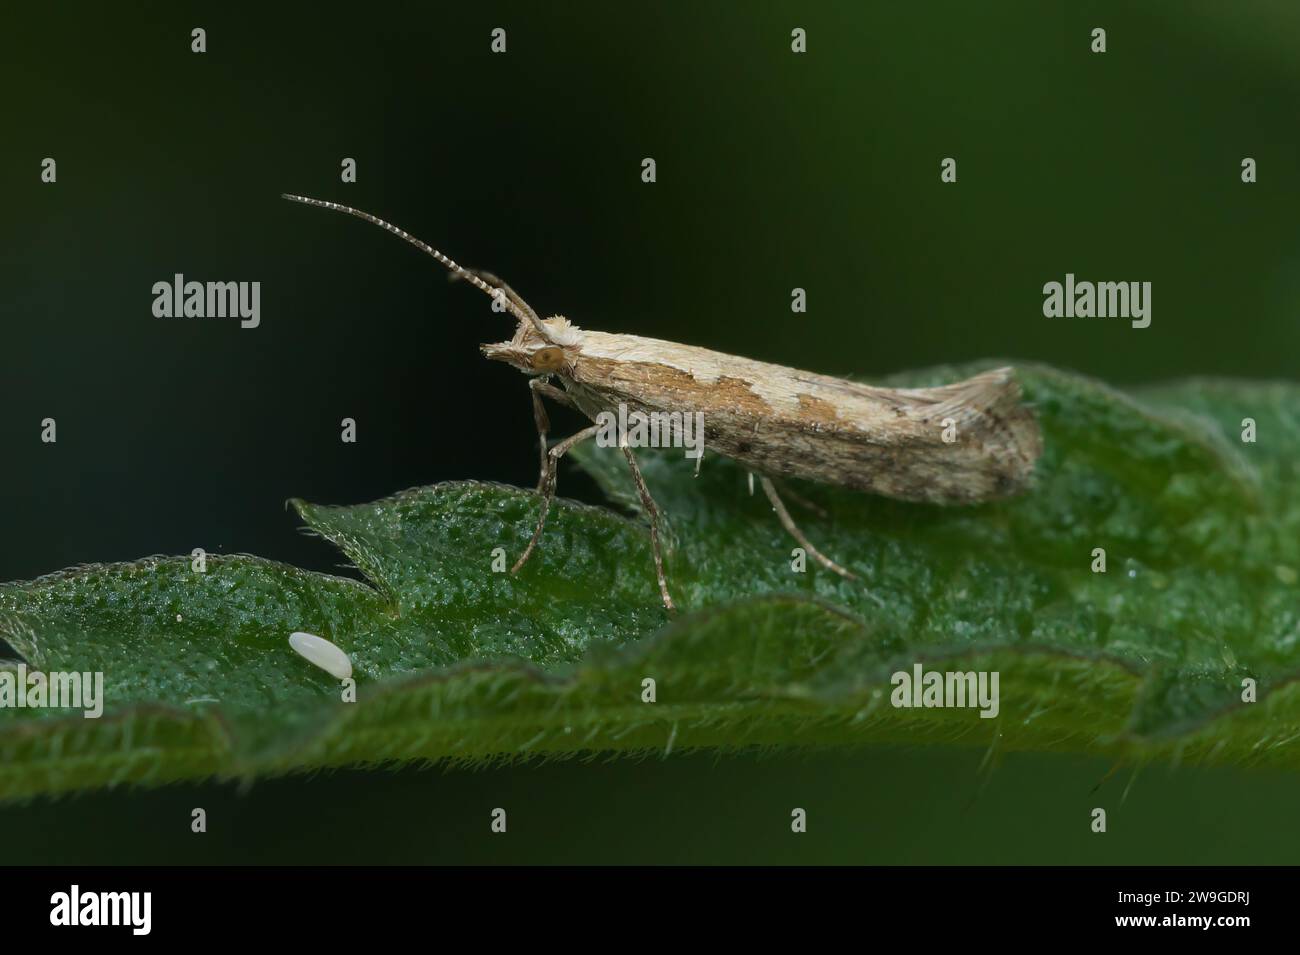 Natural closeup on the cabbage or small diamondback moth, Plutella xylostella, sitting on on a green leaf Stock Photo